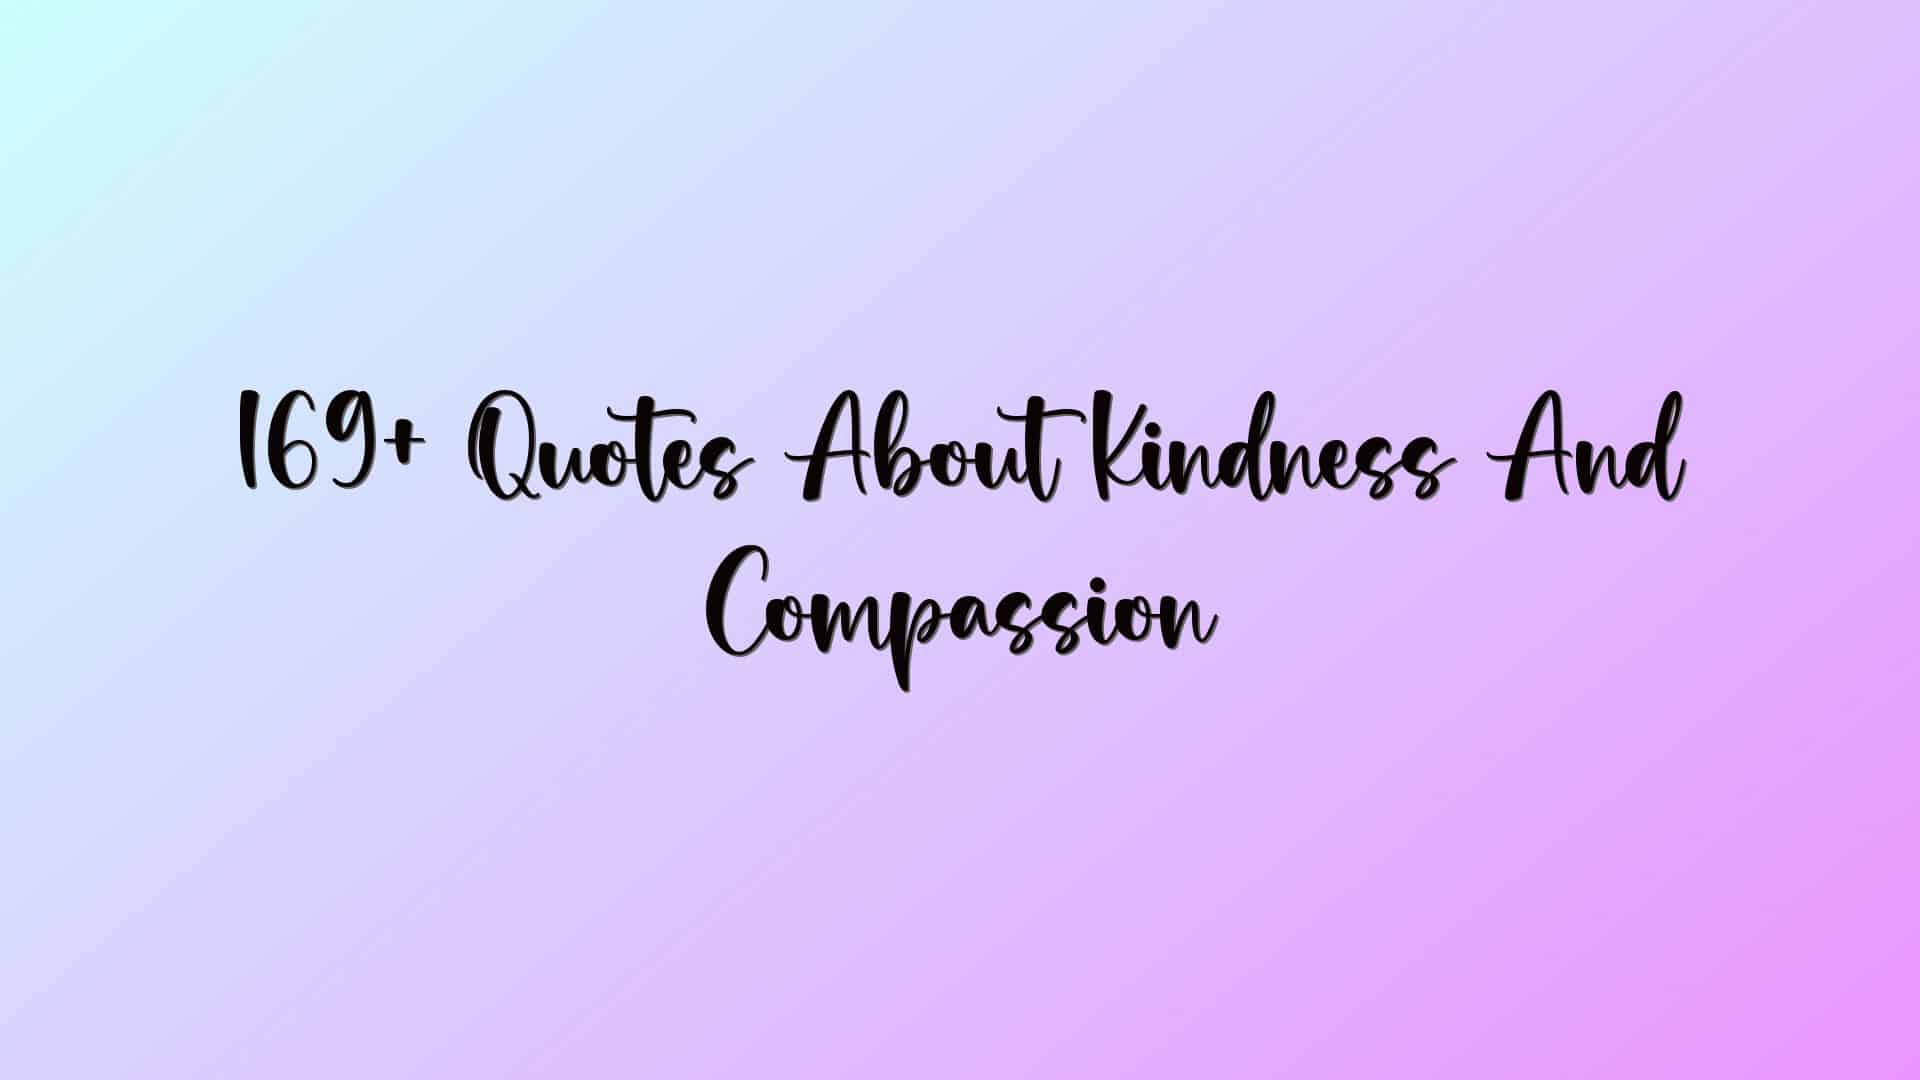 169+ Quotes About Kindness And Compassion